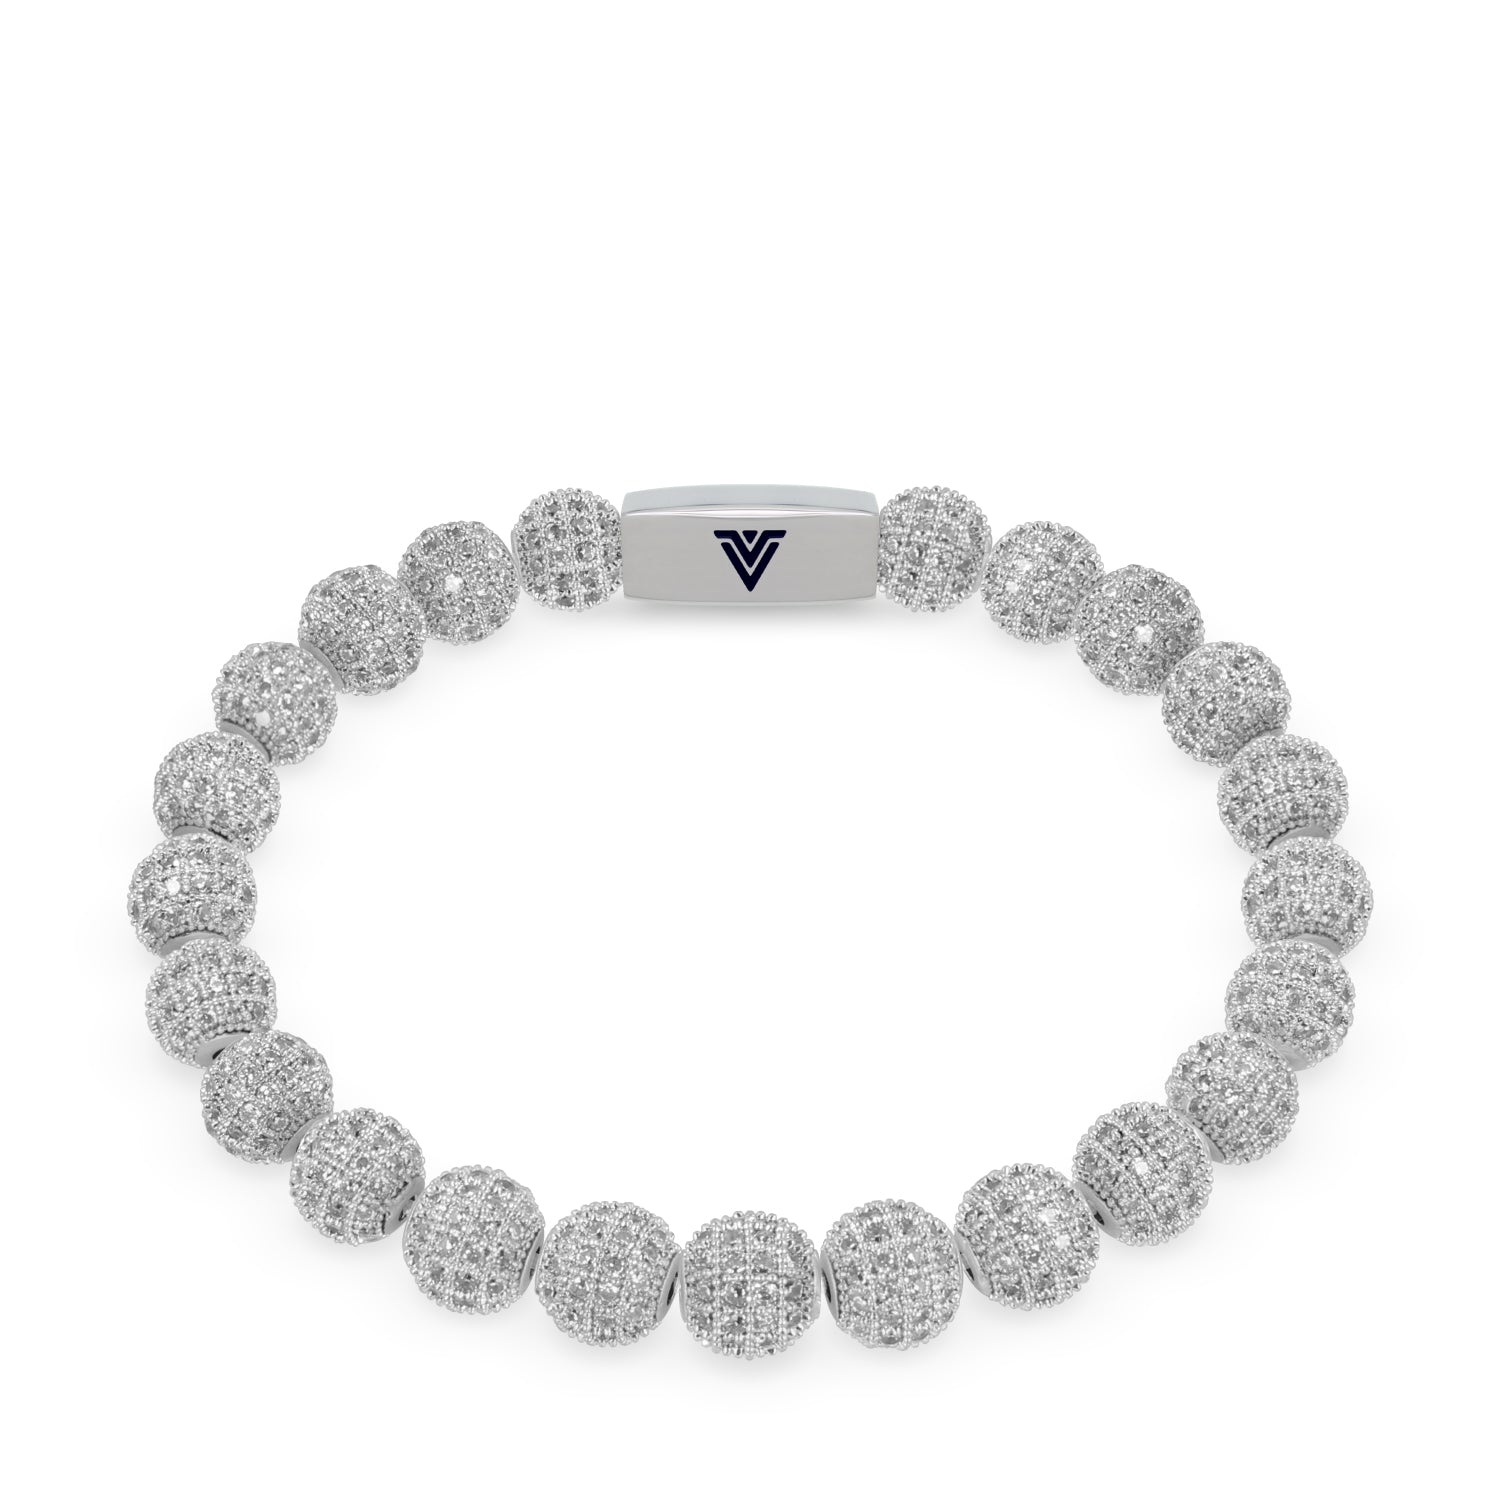 Front view of an 8mm Silver Pave beaded stretch bracelet with silver stainless steel logo bead made by Voltlin